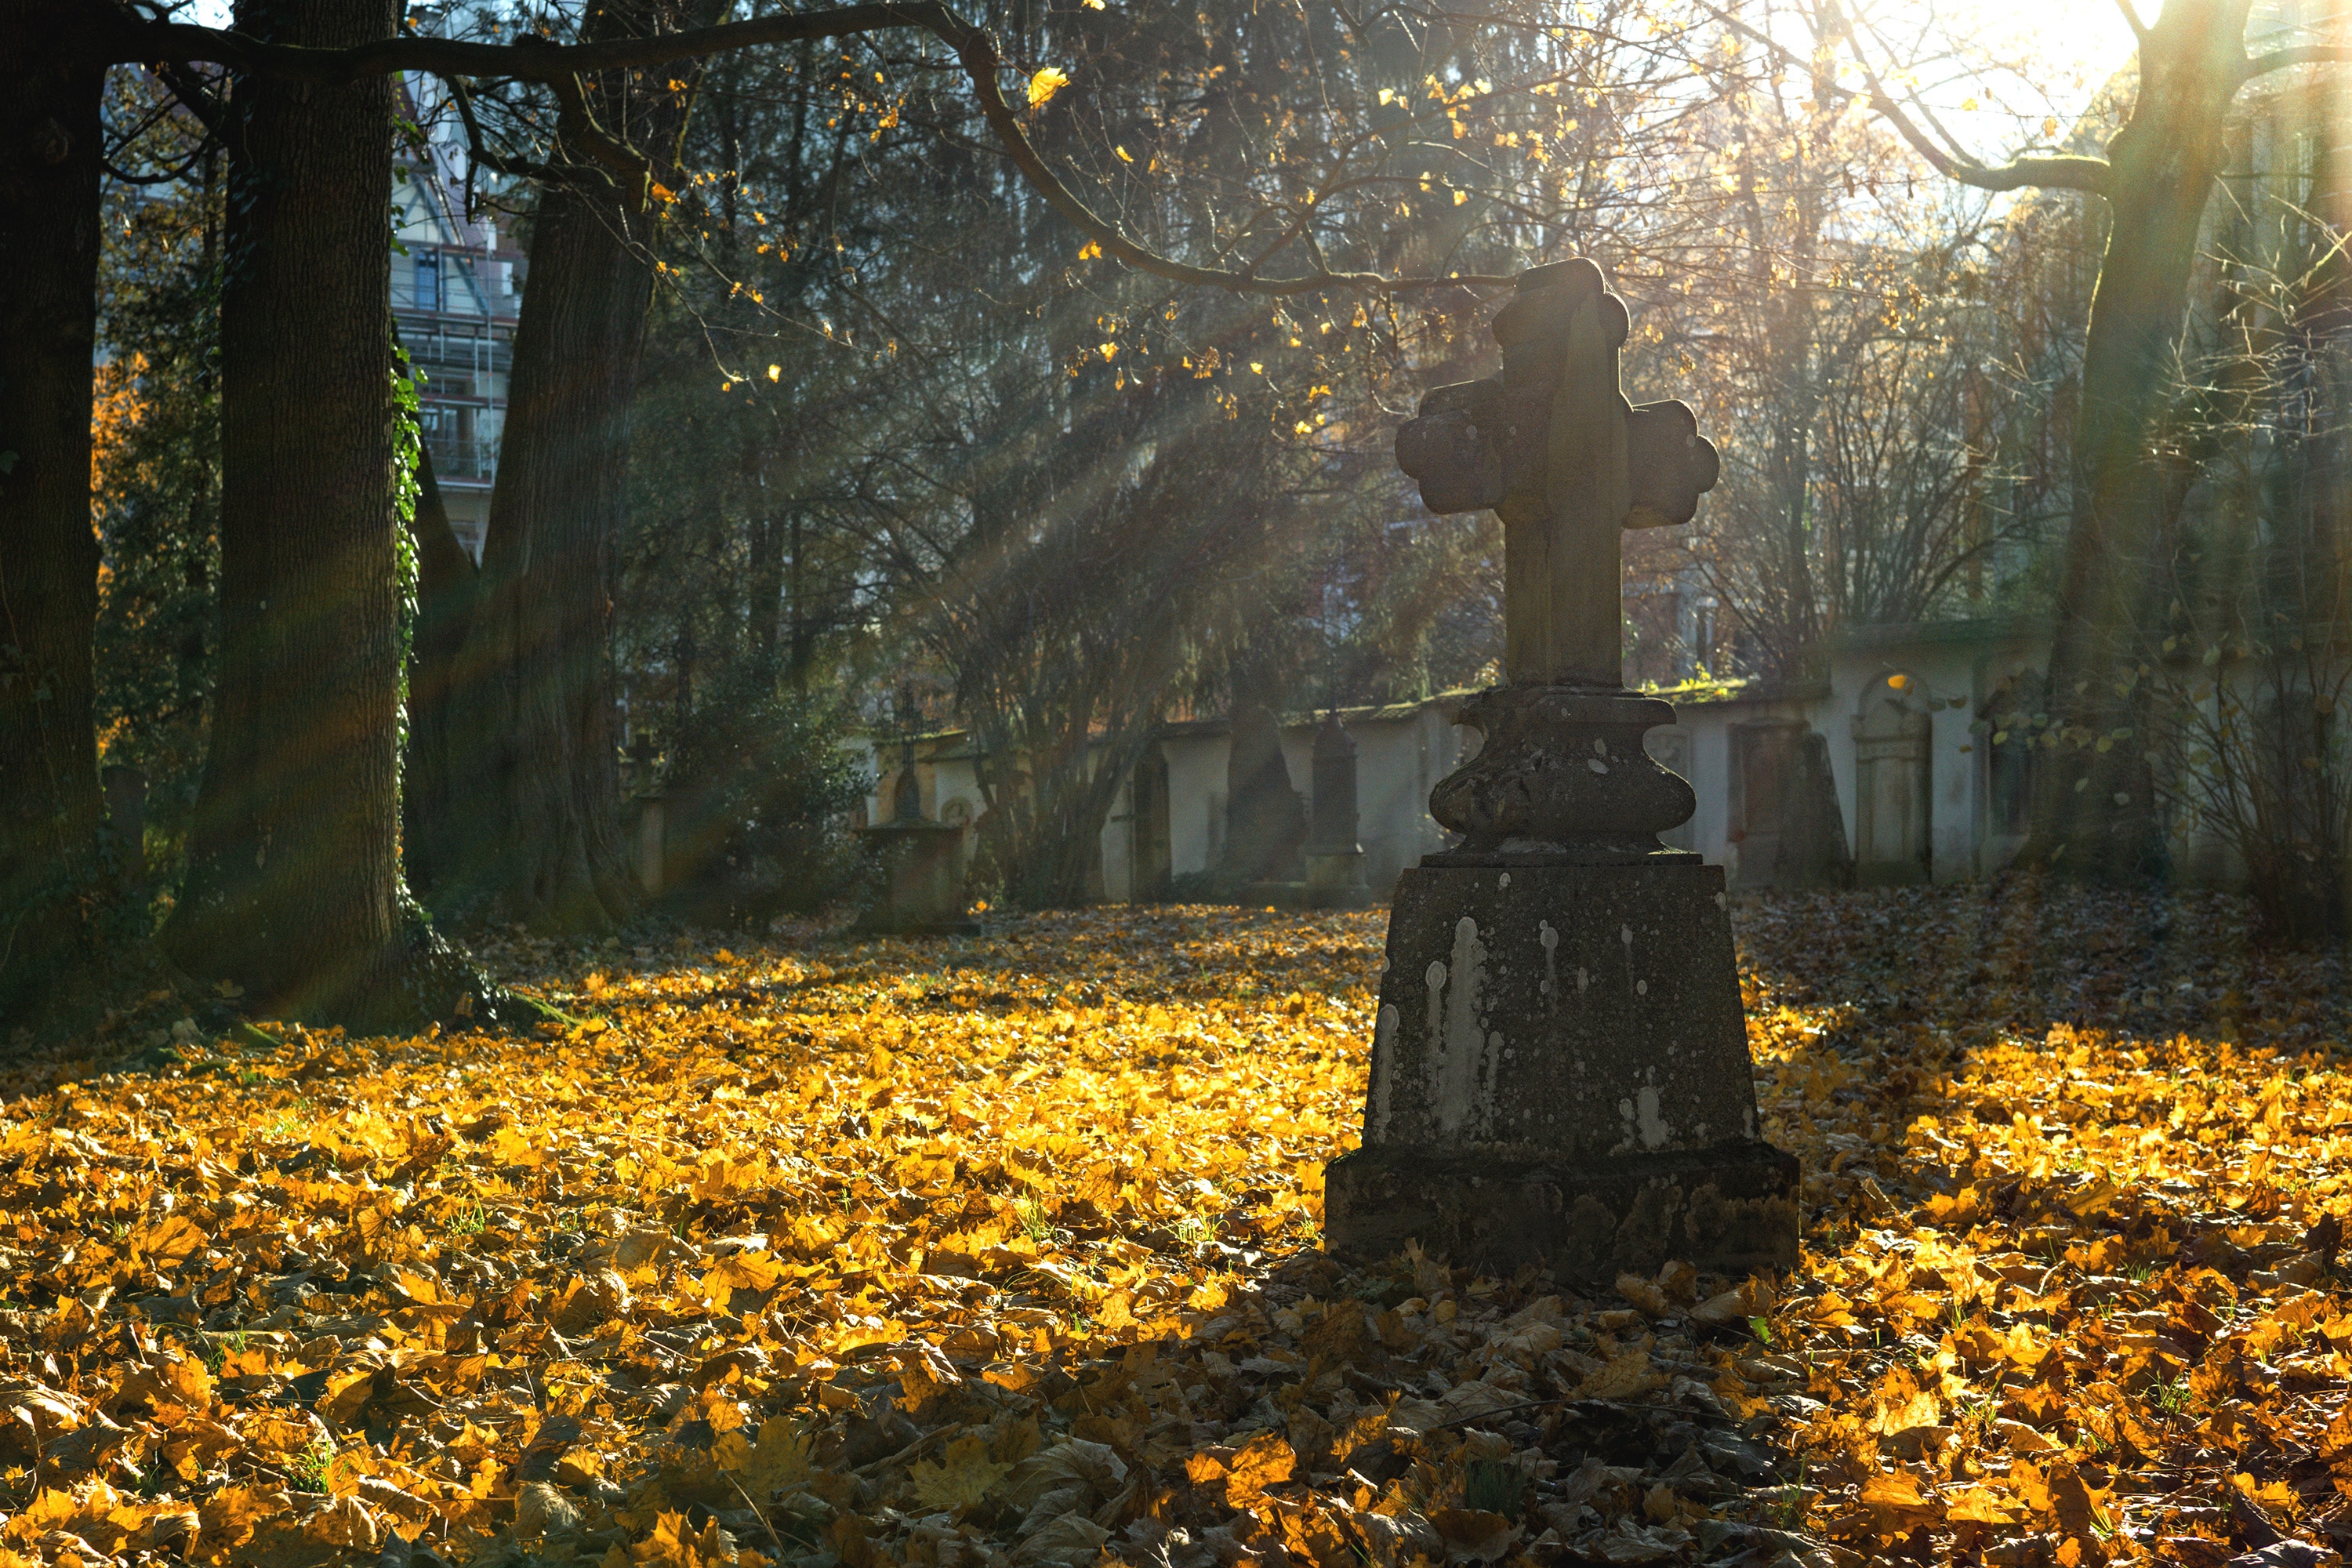 Autumn light streams past a cross monument in a cemetery. Image by Pexels, courtesy of Pixabay.